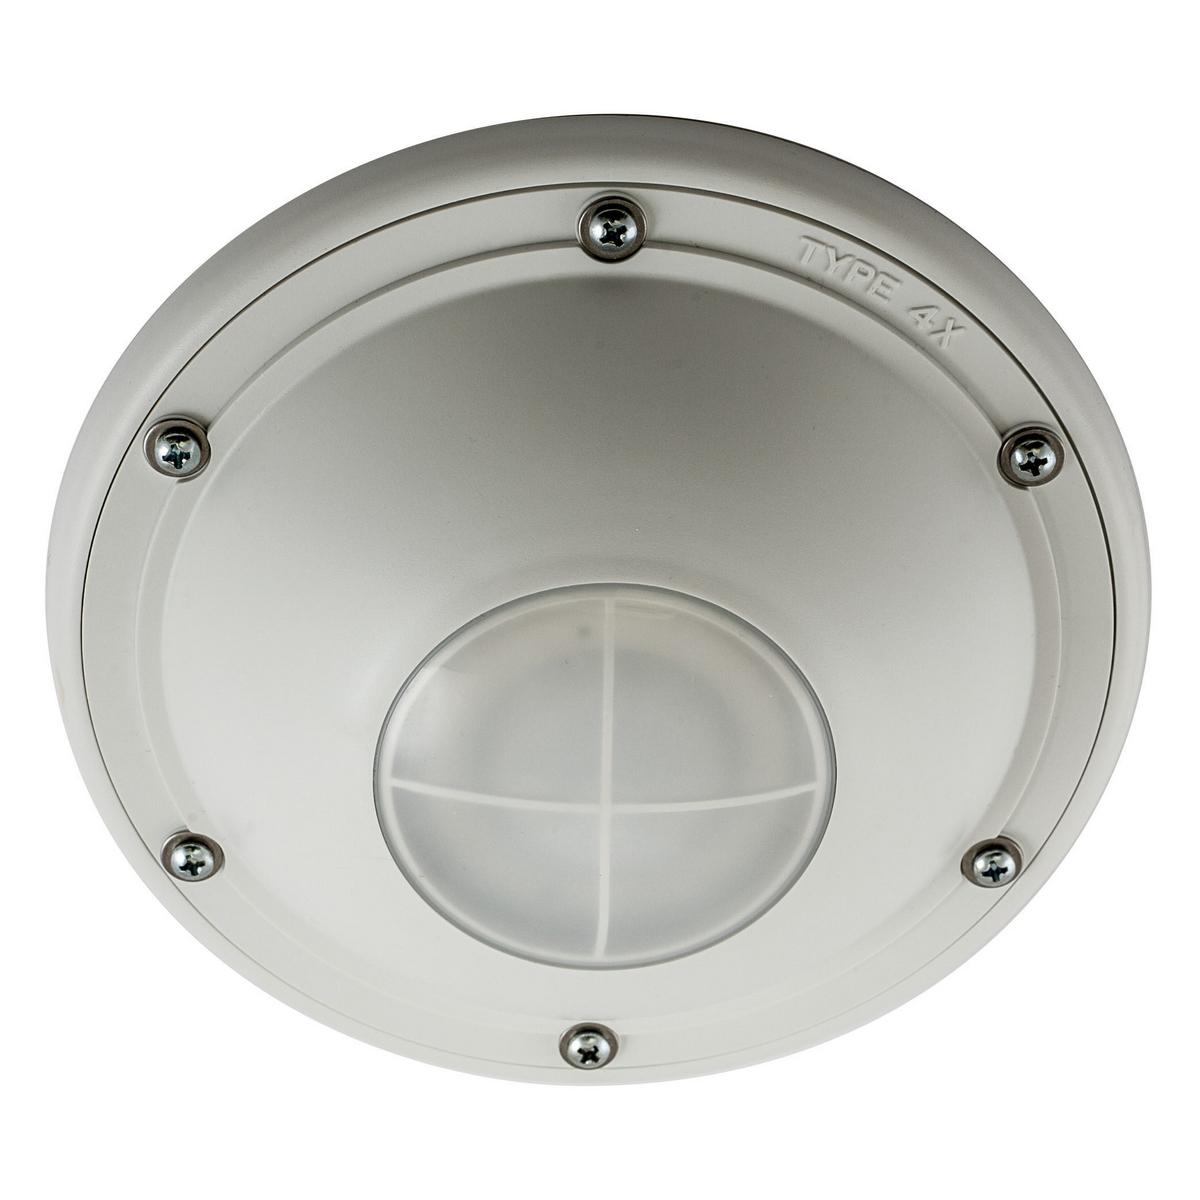 Hubbell ACIPE Switches and Lighting Controls, Protective Enclosure for IR Ceiling Sensor, NEMA 4X  ; NEMA 4X enclosure ; Designed to provide protection from foreign materials and water ; NEMA 4X Enclosure